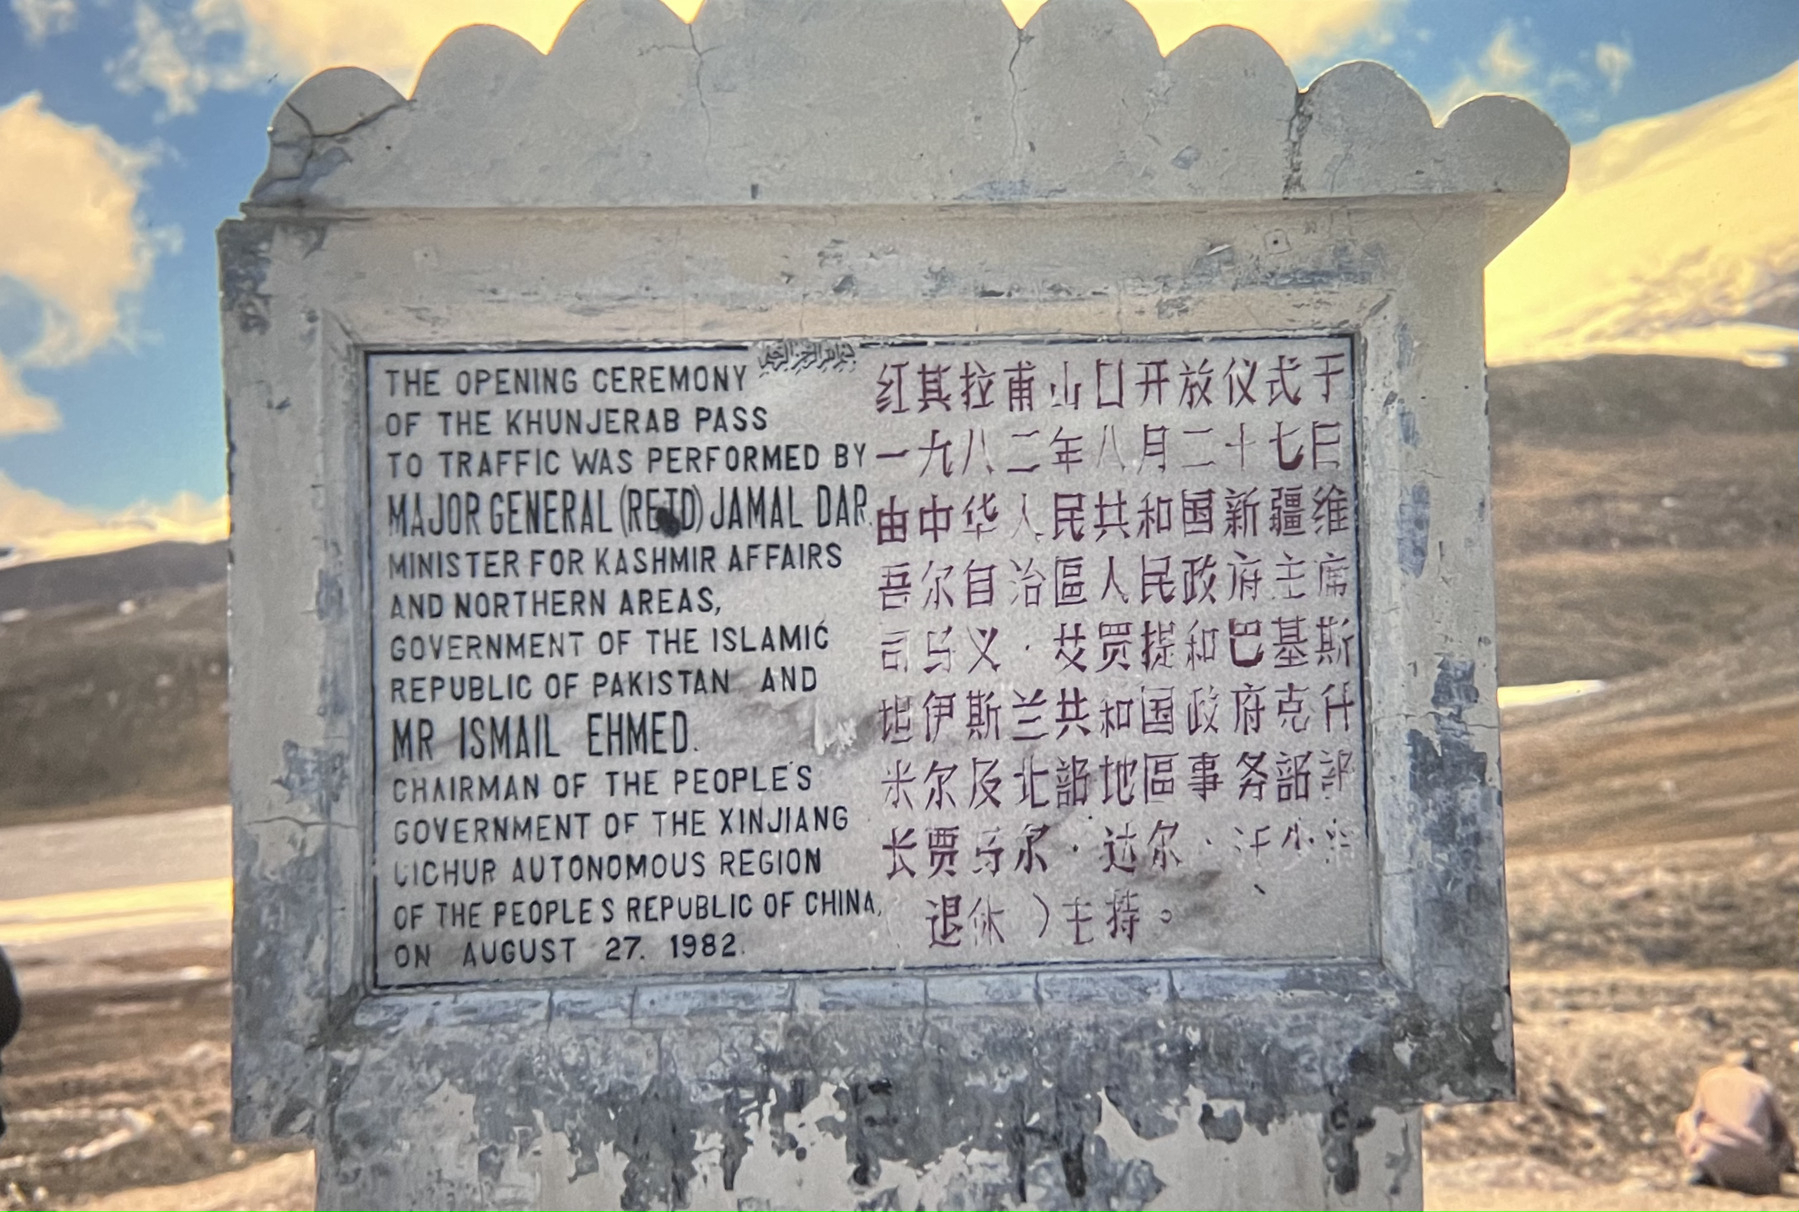 A sign in English and Chinese commemorating the opening of the Khunjerab Pass